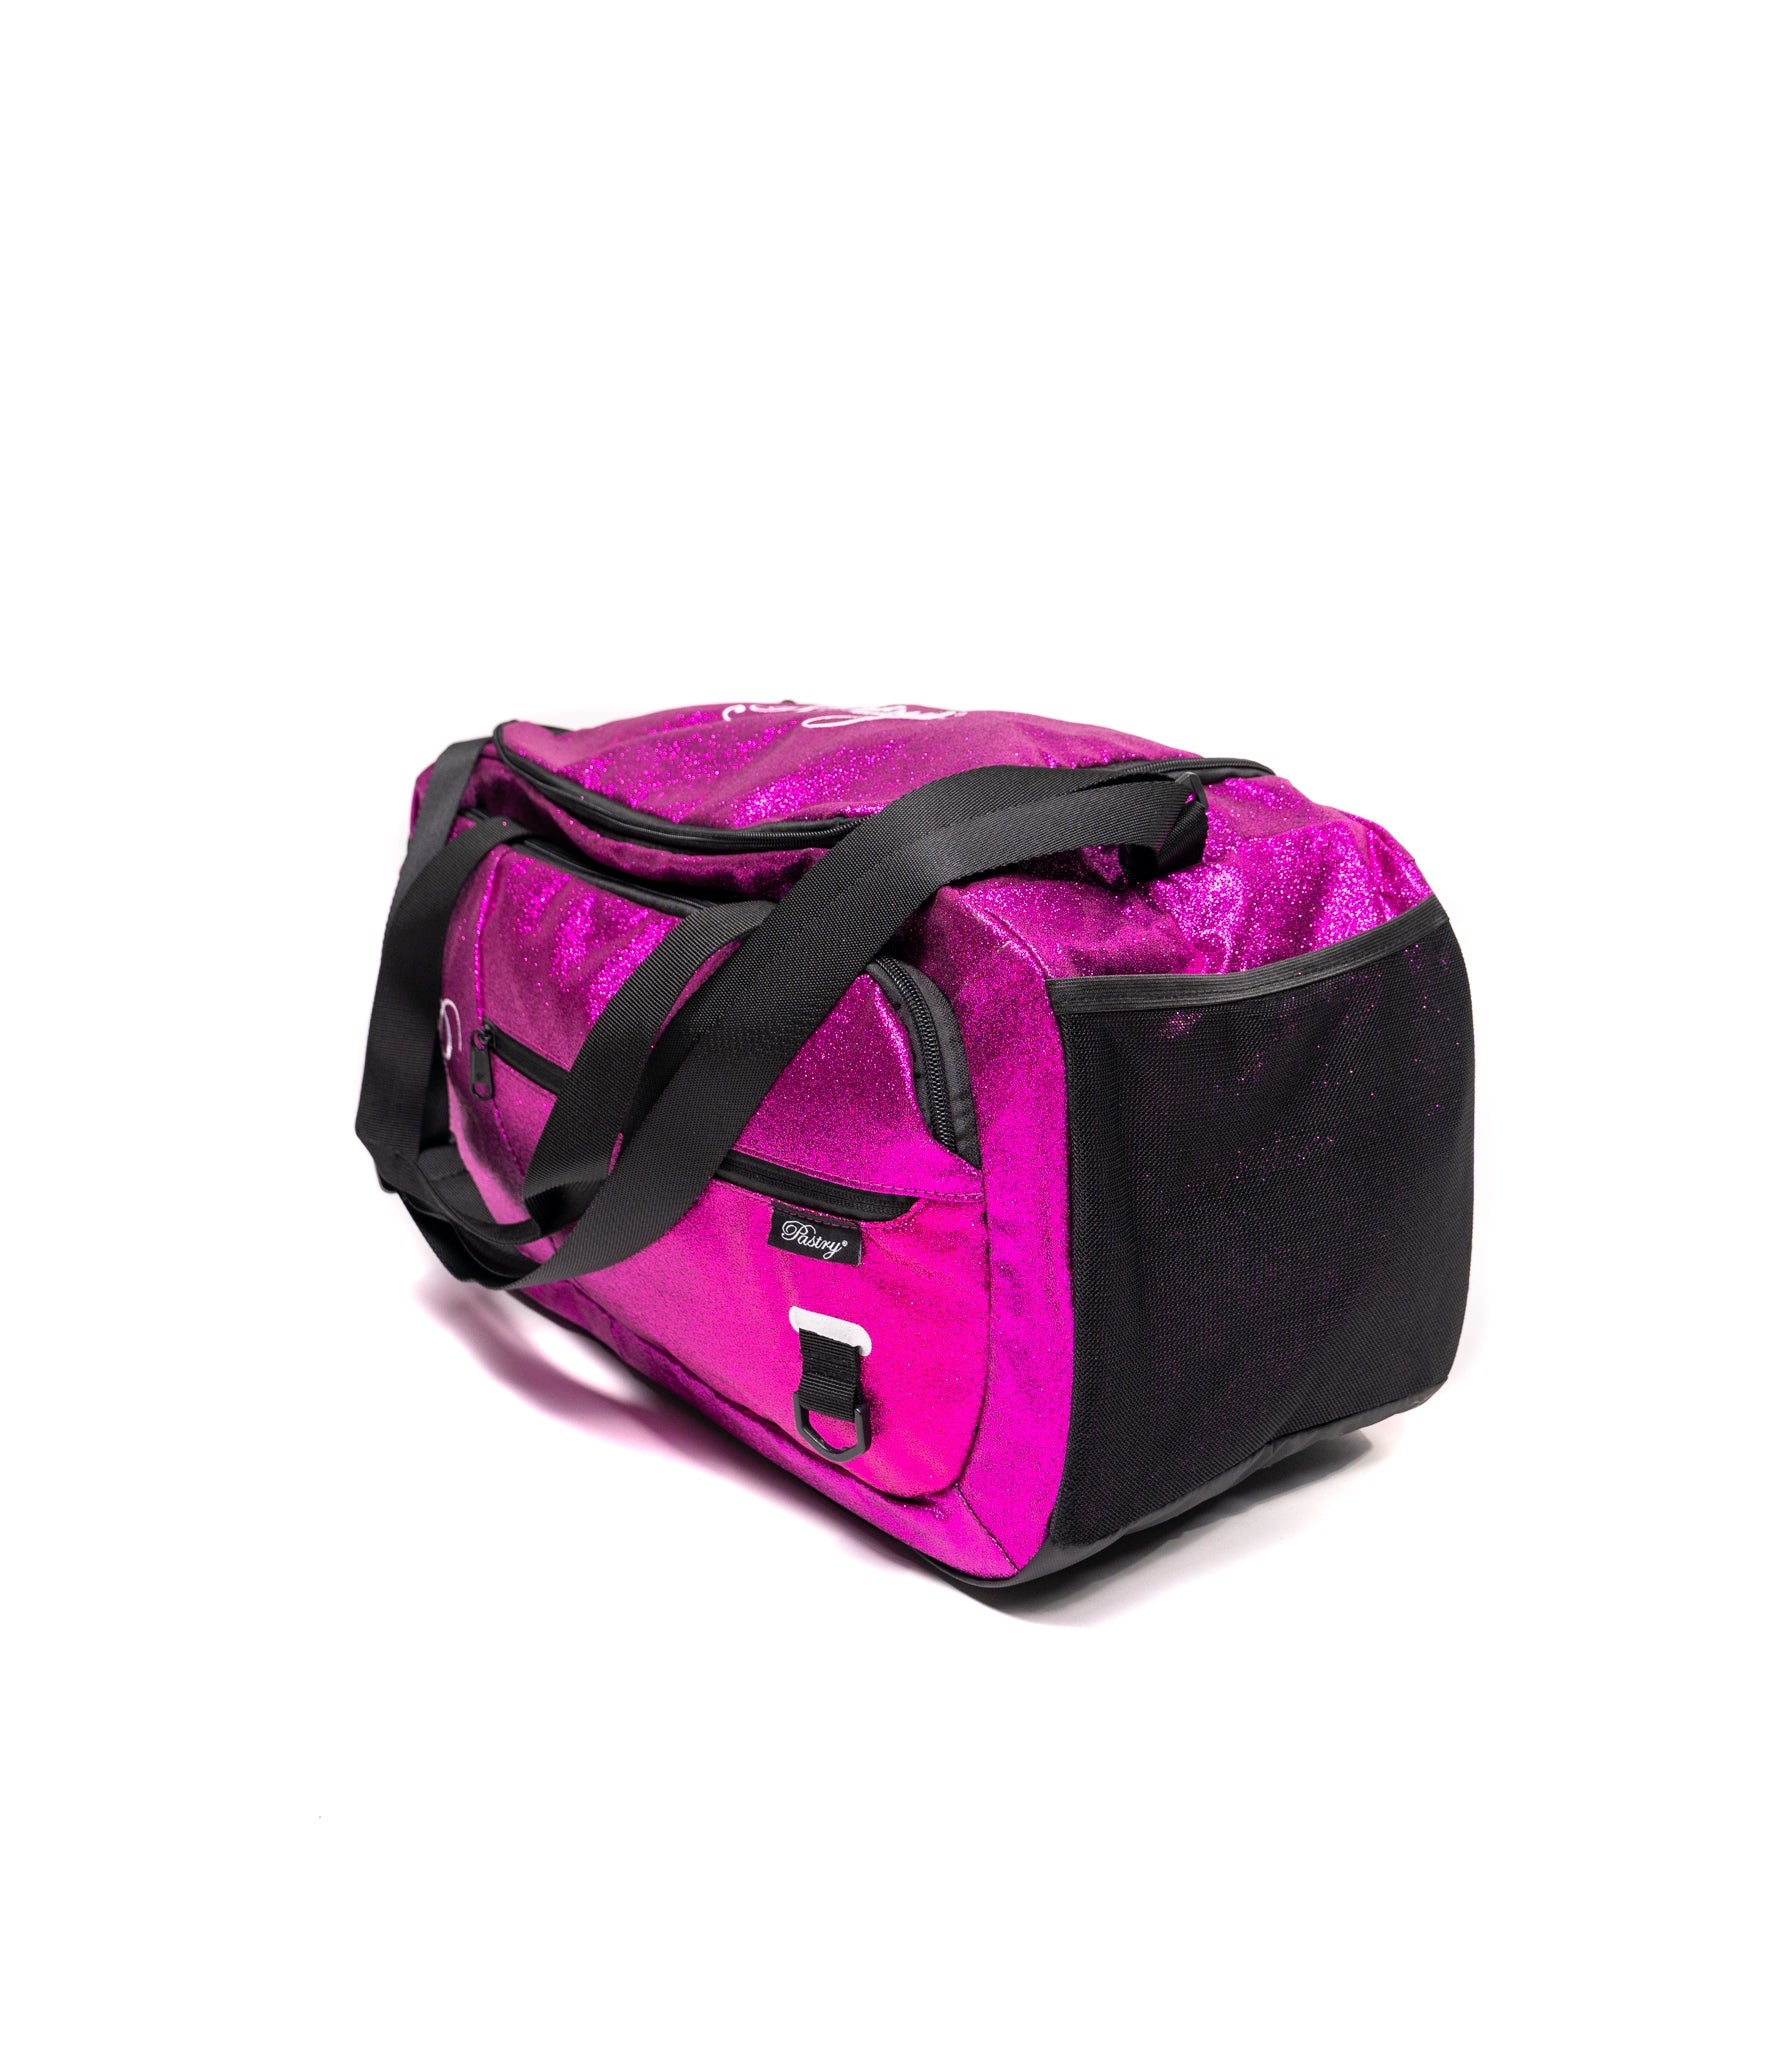 Pastry Duffle Bag Glitter Hot Pink 3 quarter view